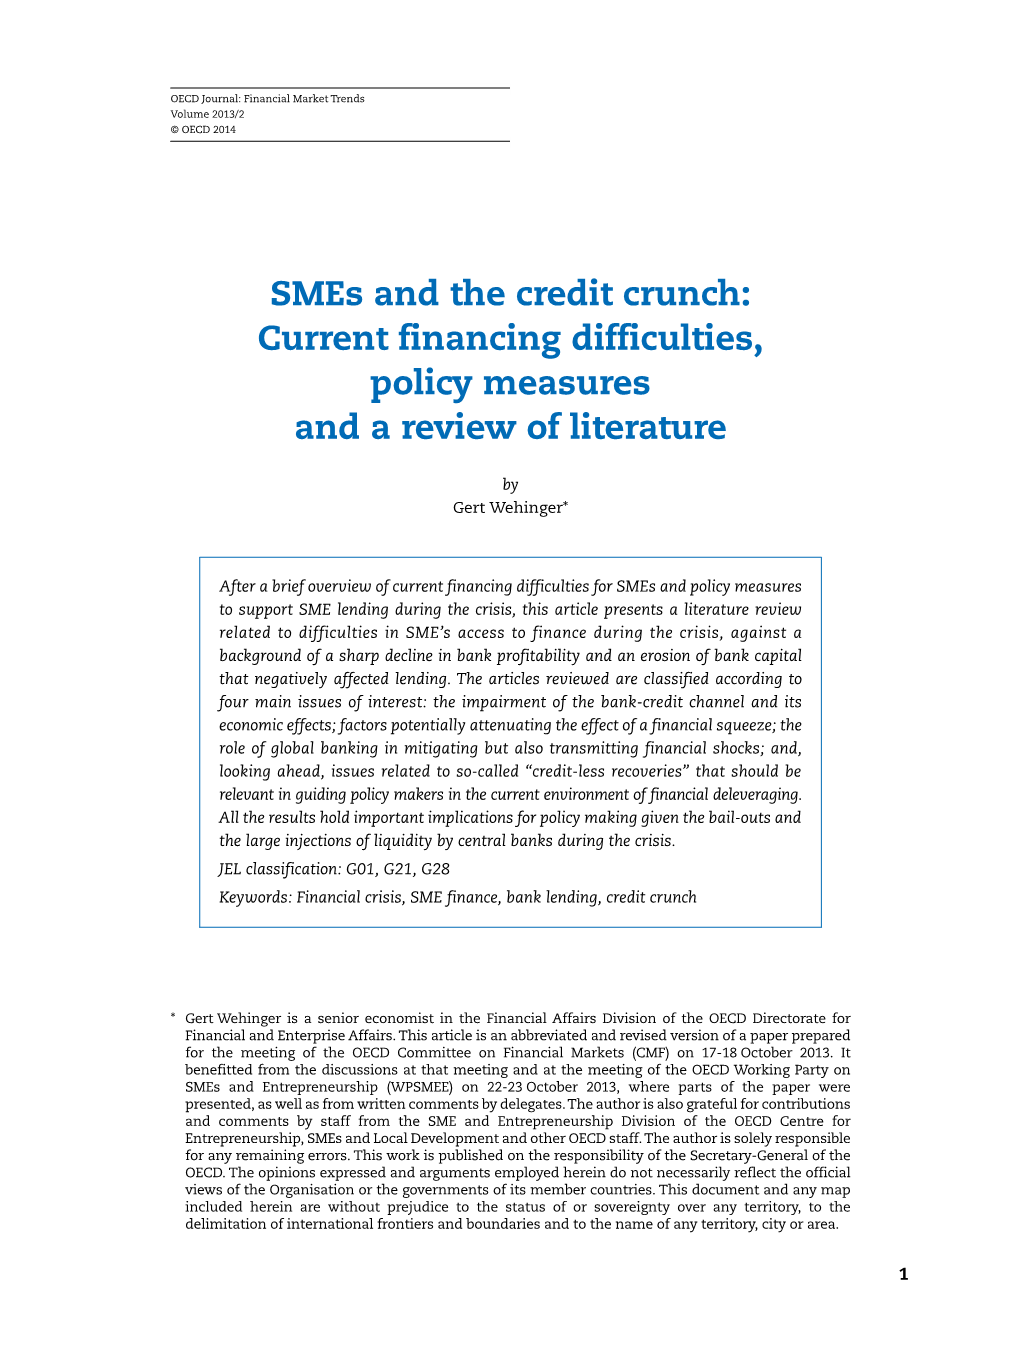 Smes and the Credit Crunch: Current Financing Difficulties, Policy Measures and a Review of Literature